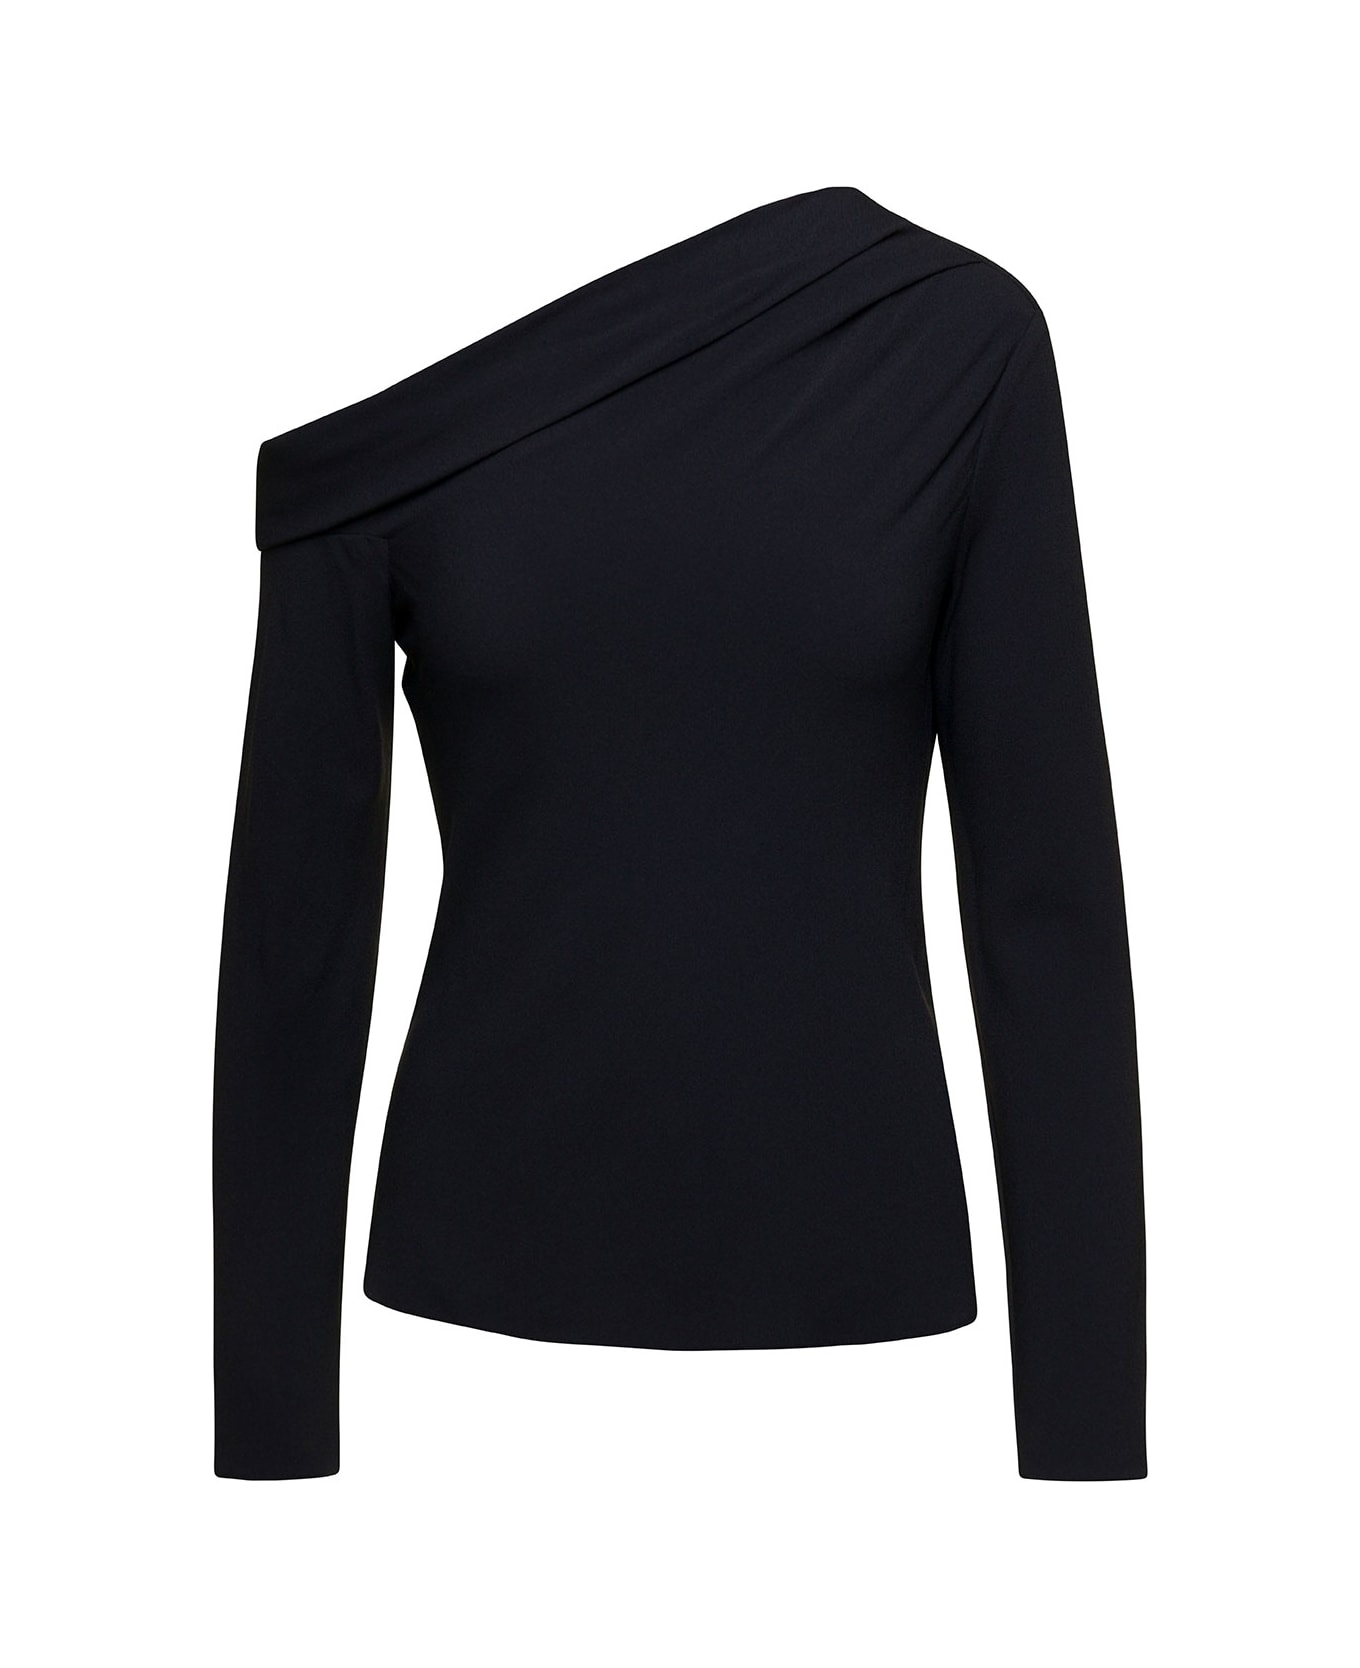 Theory Black Off-shoulder Fitted Top In Viscose Blend Woman - Black